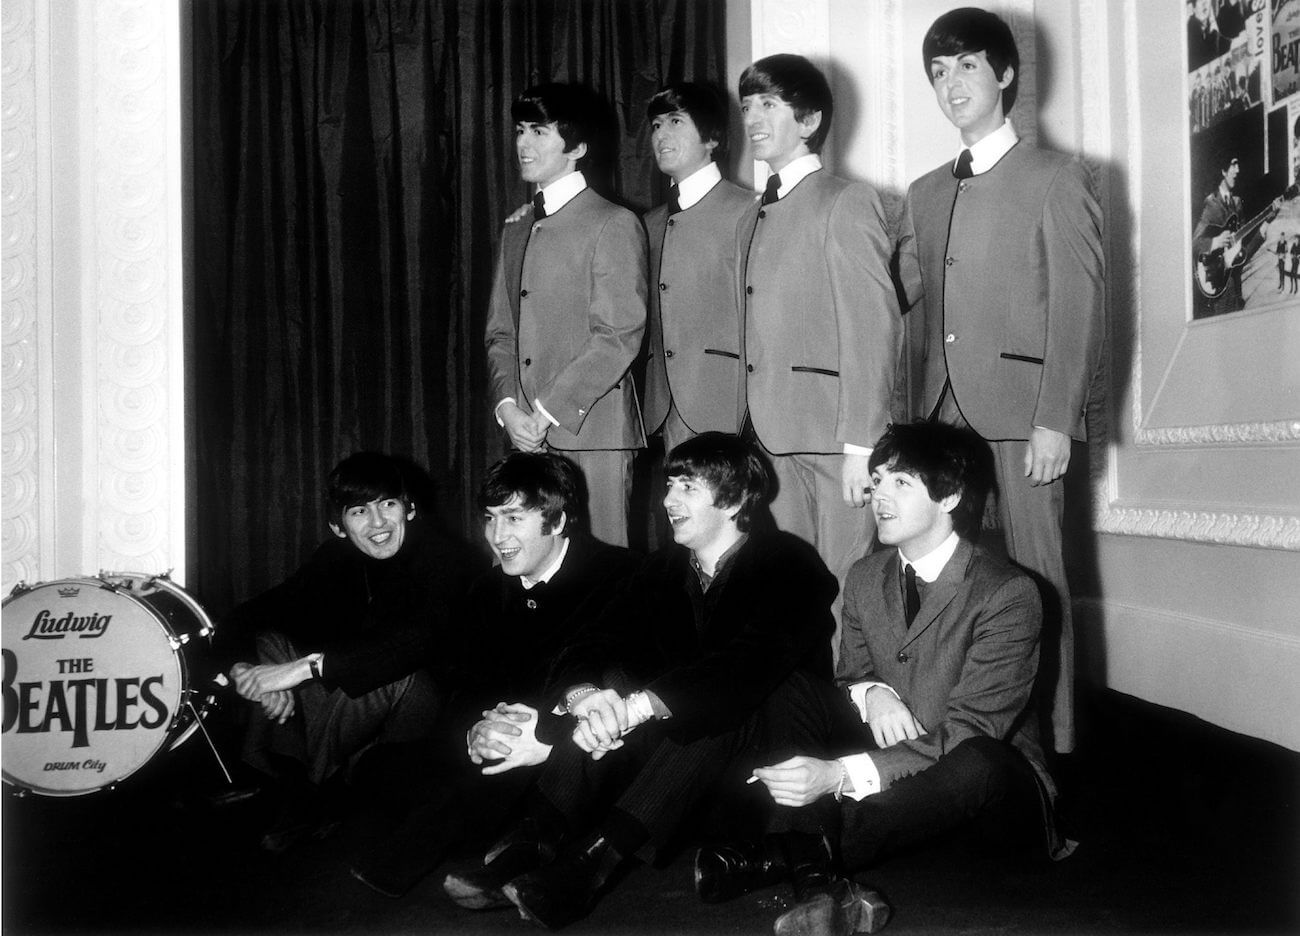 Madame Tussauds wax figures of The Beatles, with the band posing in 1964.